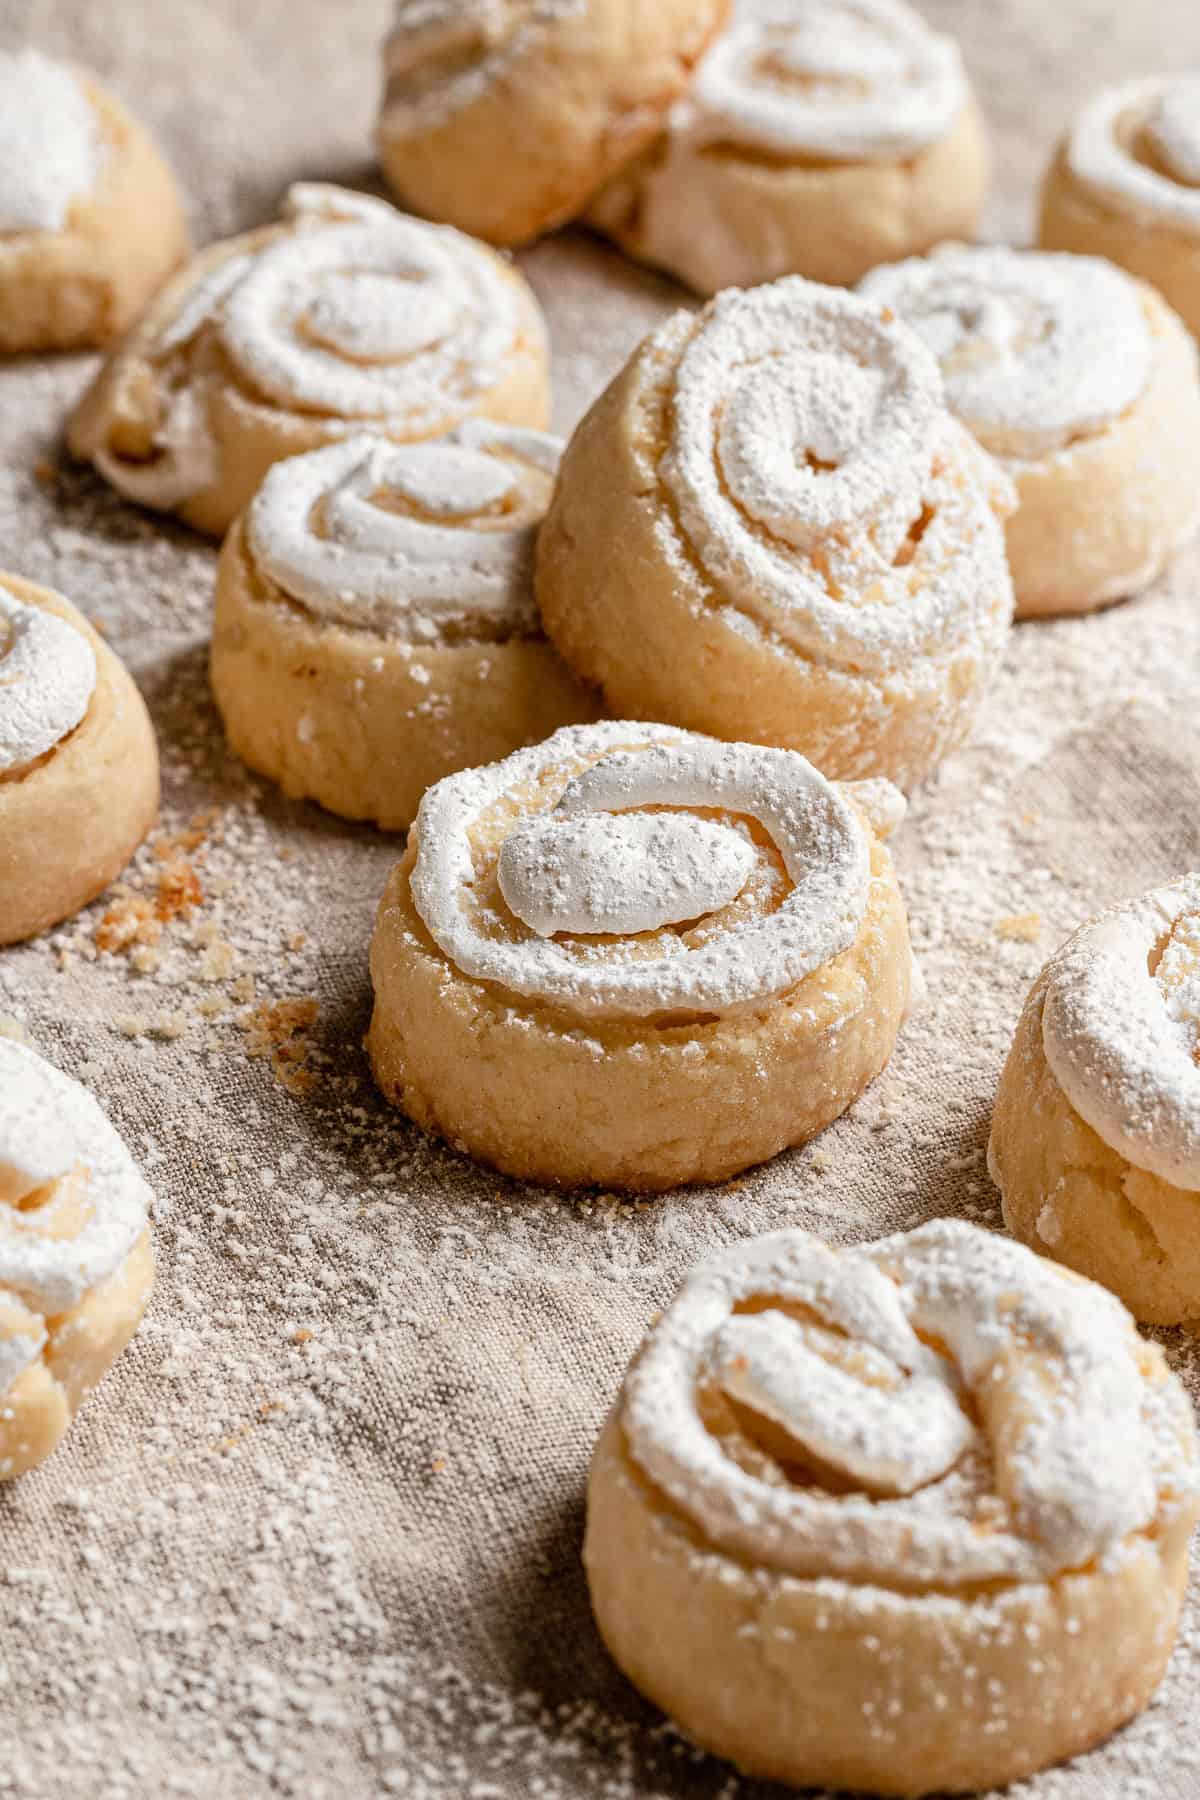 Finnish meringue cookies  dusted with sugar